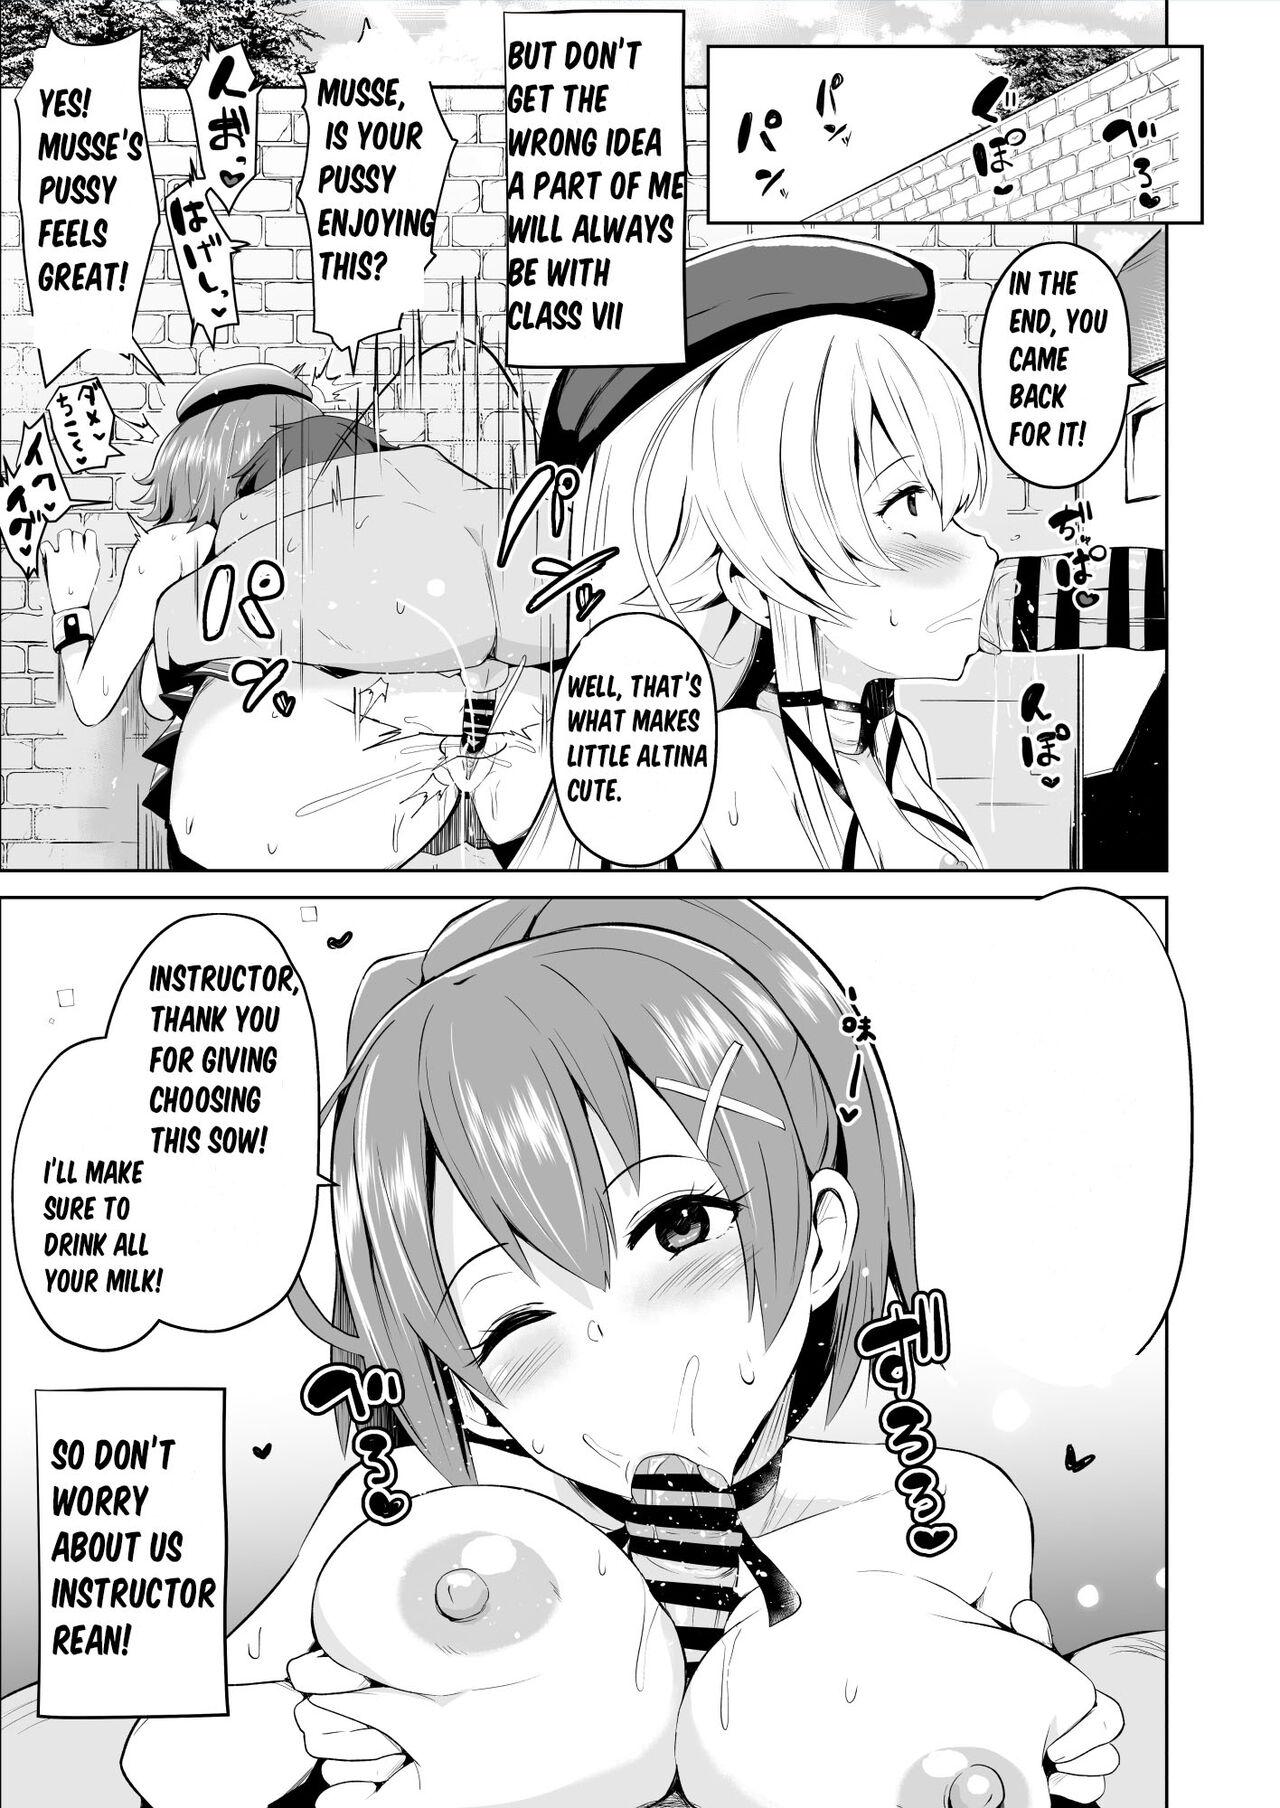 Gaygroup Hypnosis of the New Class VII - Juna's Report - The legend of heroes | eiyuu densetsu Funny - Page 7